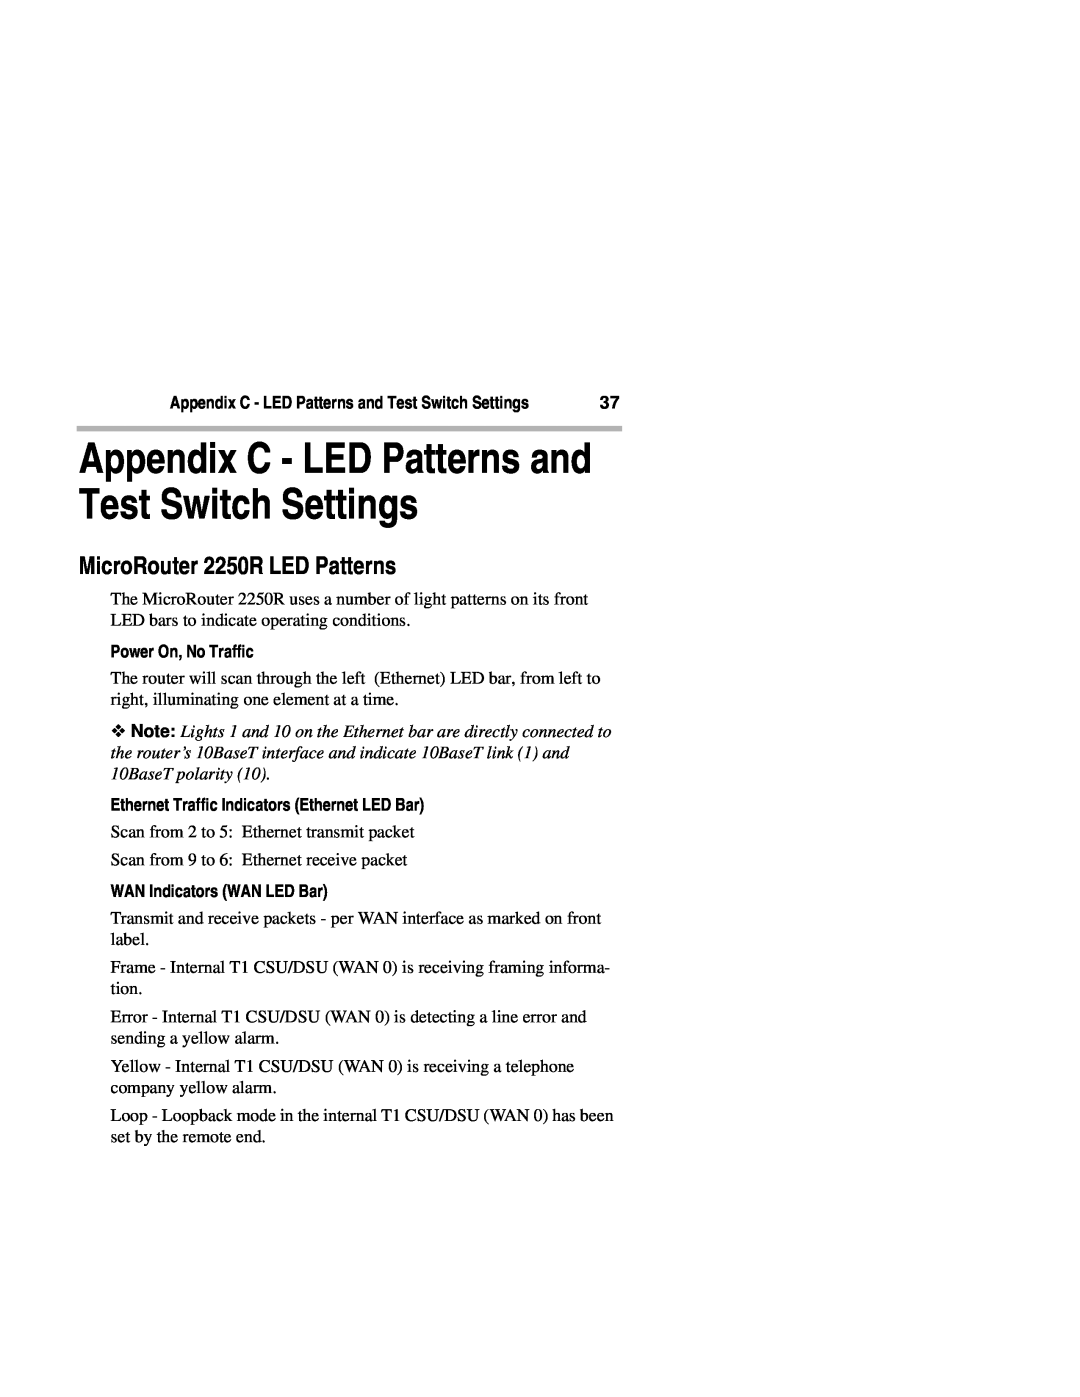 Compatible Systems manual MicroRouter 2250R LED Patterns, Appendix C - LED Patterns and Test Switch Settings 